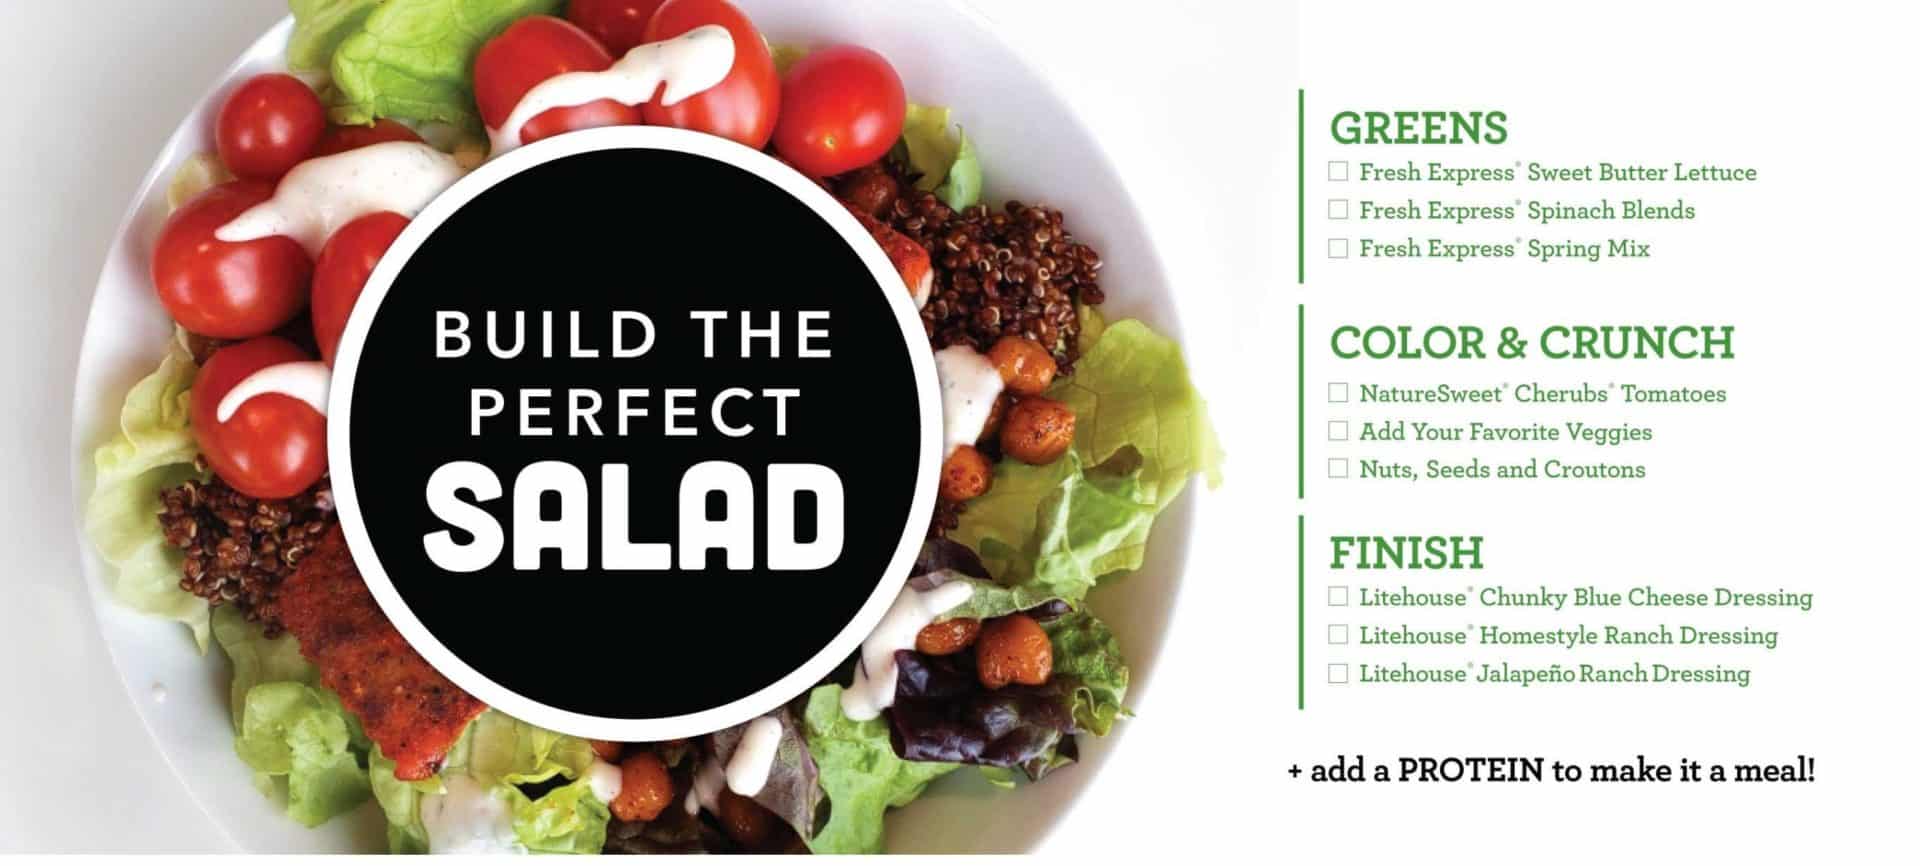 BUILD THE PERFECT SALAD